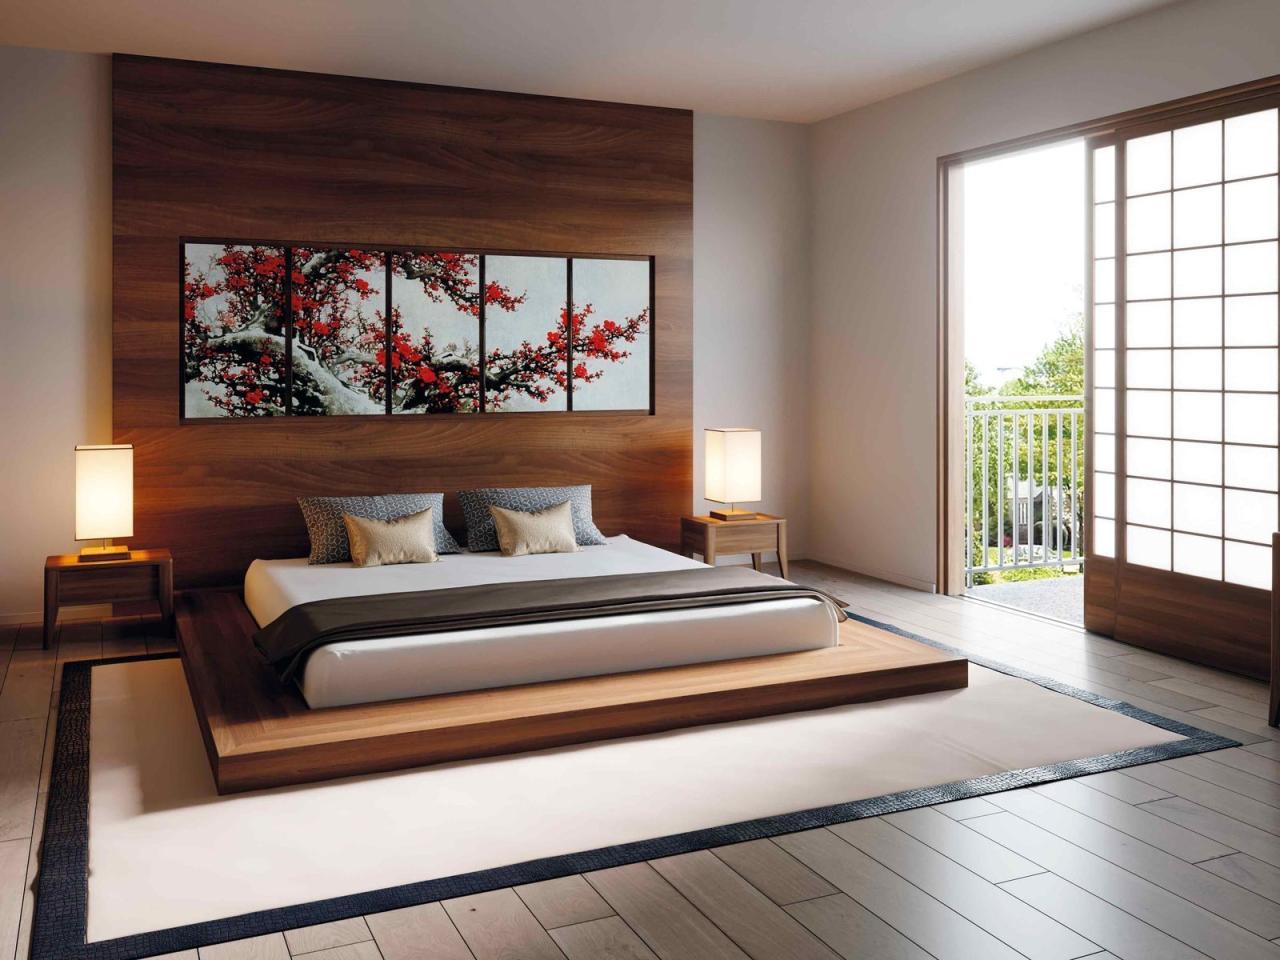 Zen bedroom master bedrooms inspired modern theme sunset style designs room decor themed decorating bed colors contemporary serenely stylish dramatic